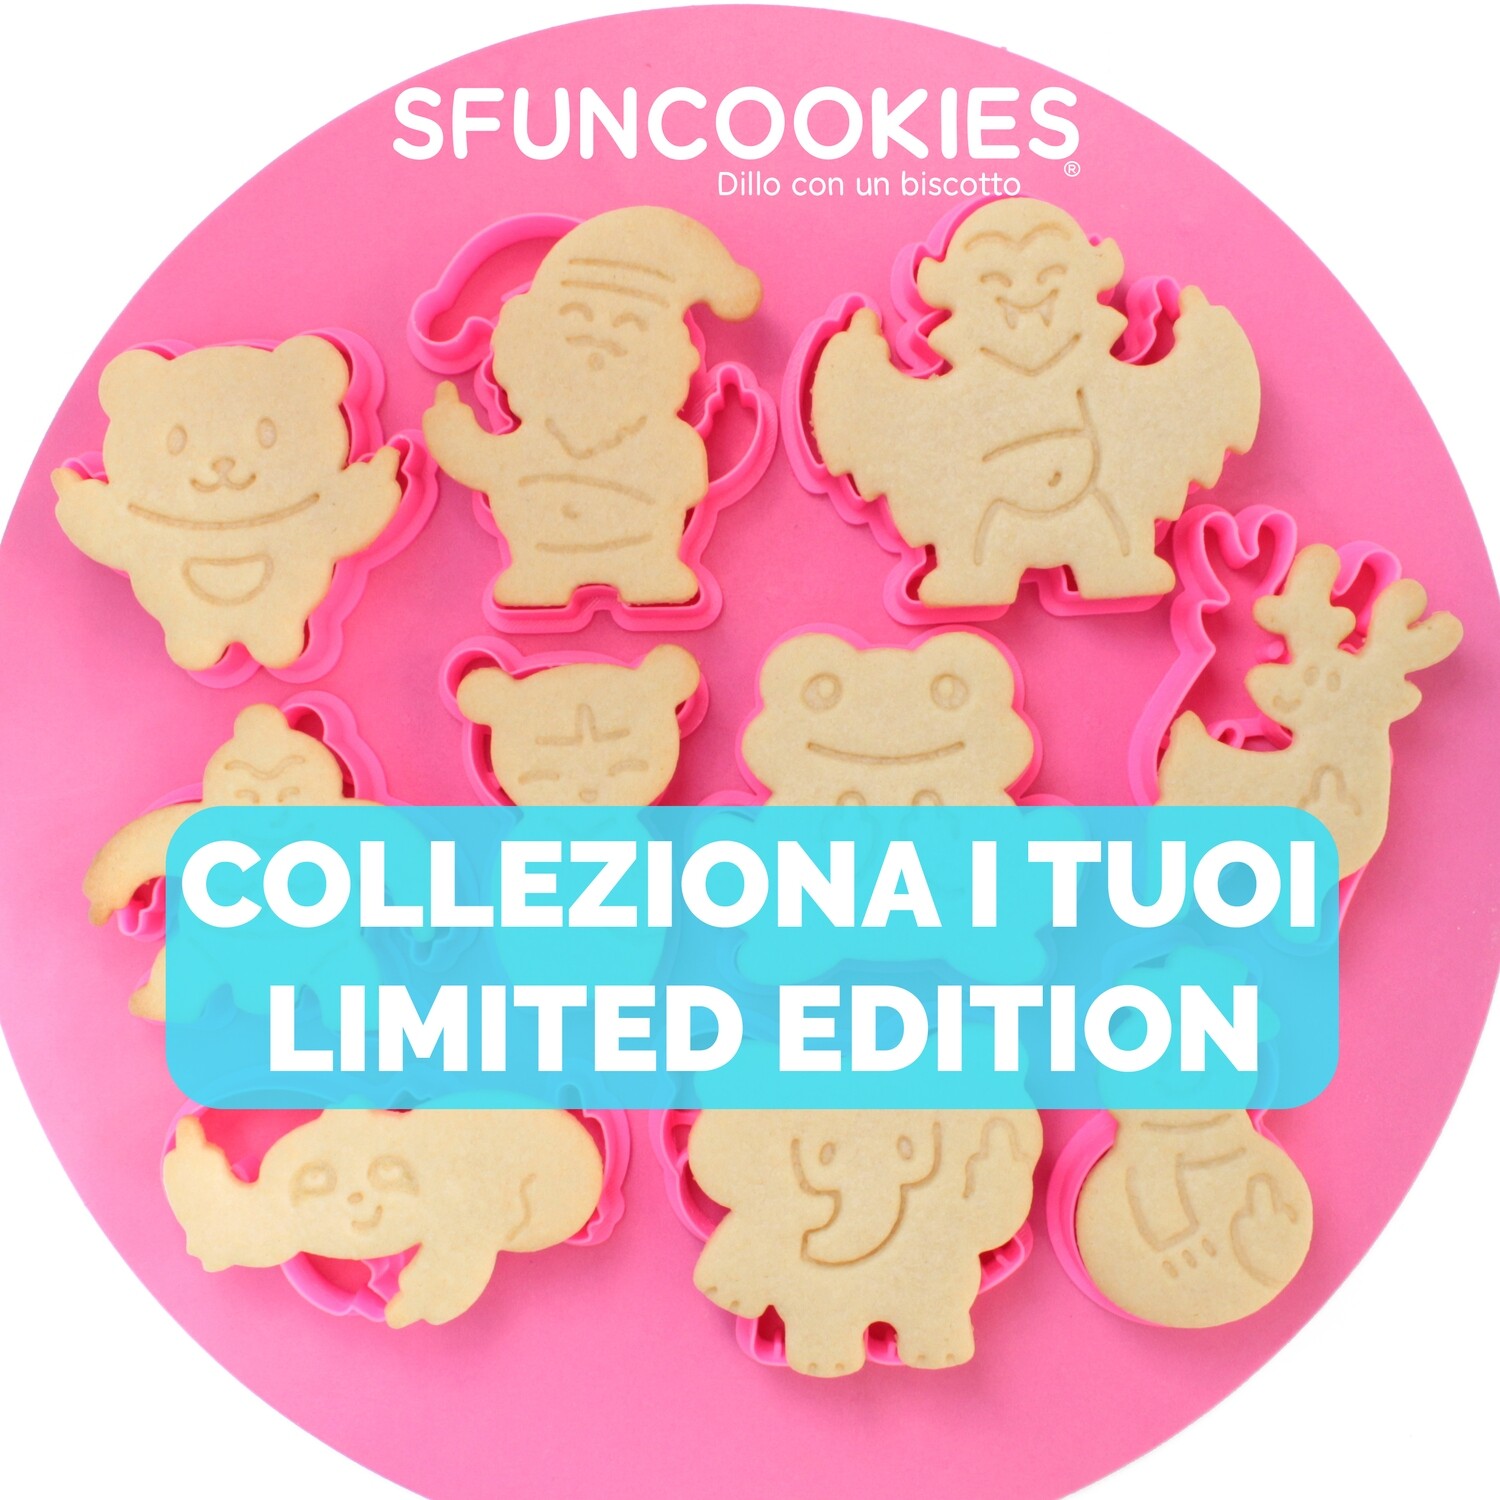 SFUNCOOKIES LIMITED EDITION